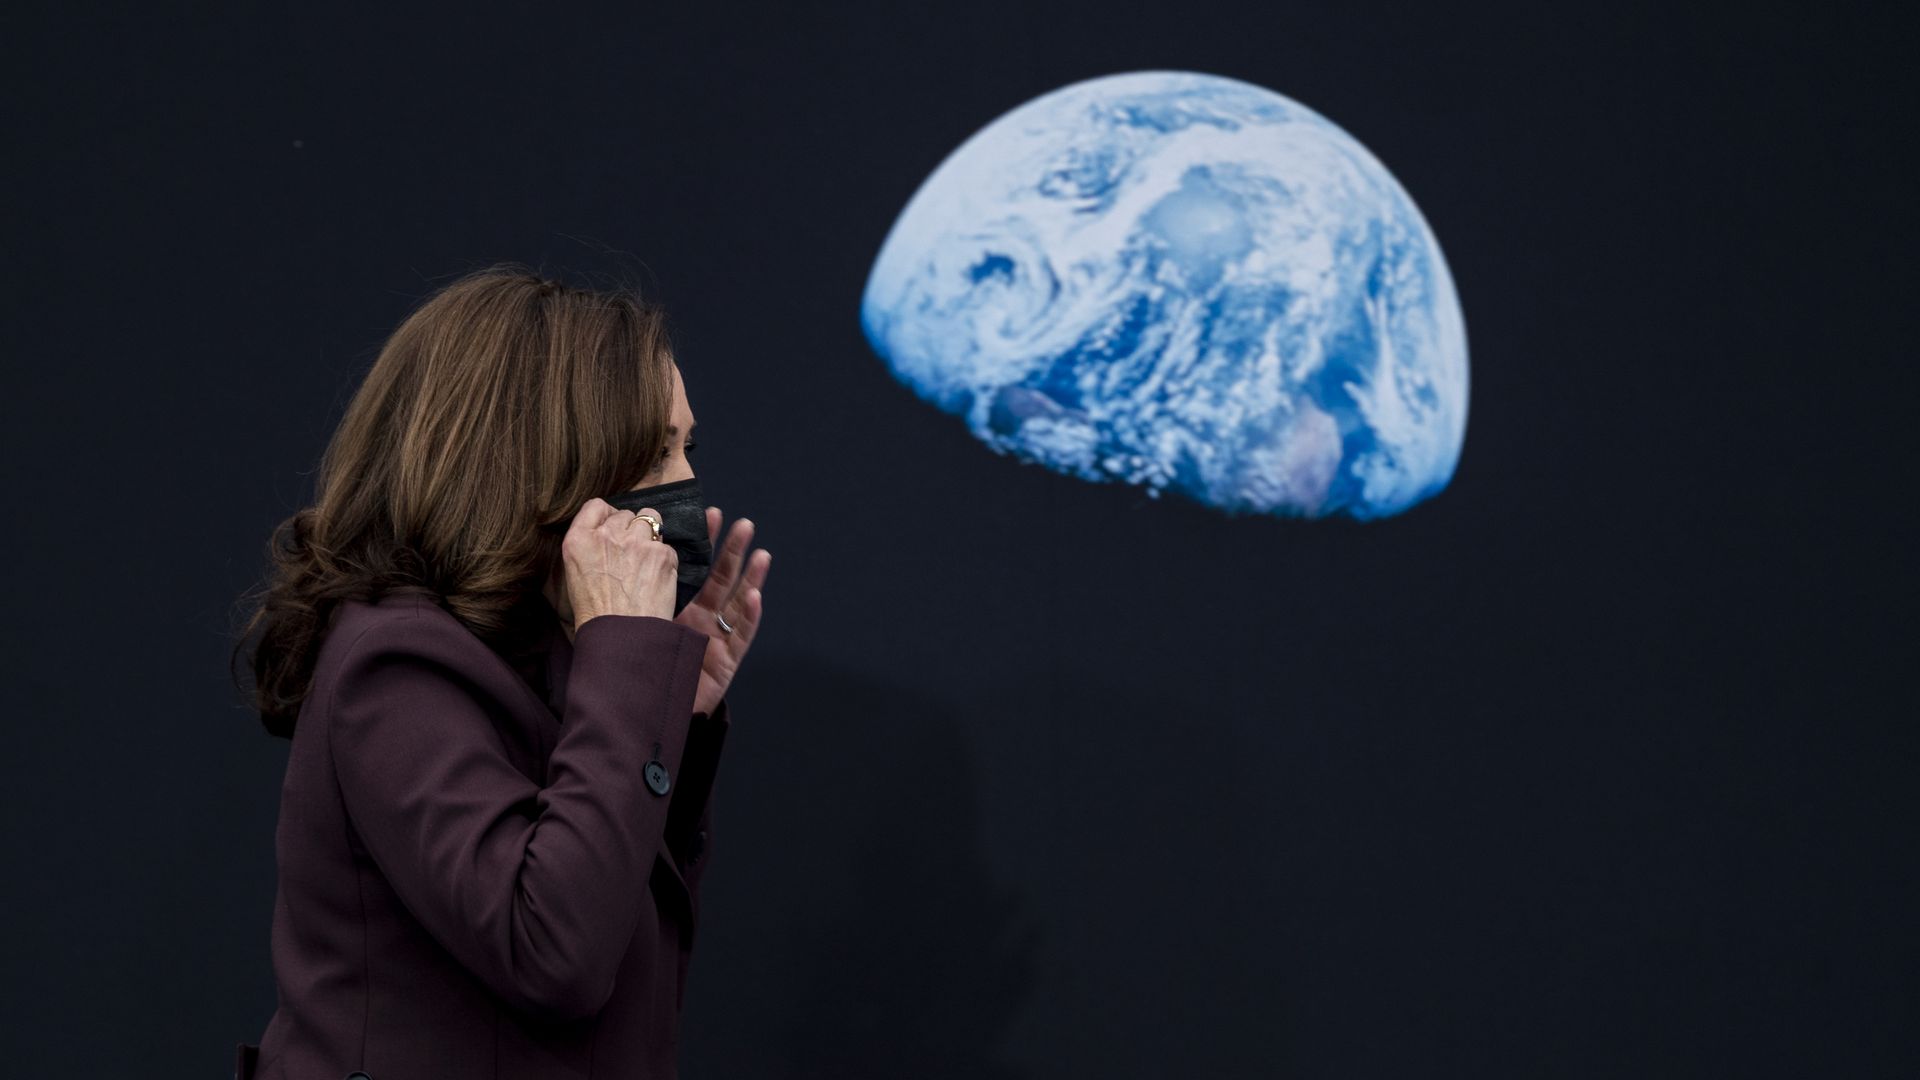 Vice President Kamala Harris is seen walking past a photo of the moon as she enters the inaugural meeting of the National Space Council.